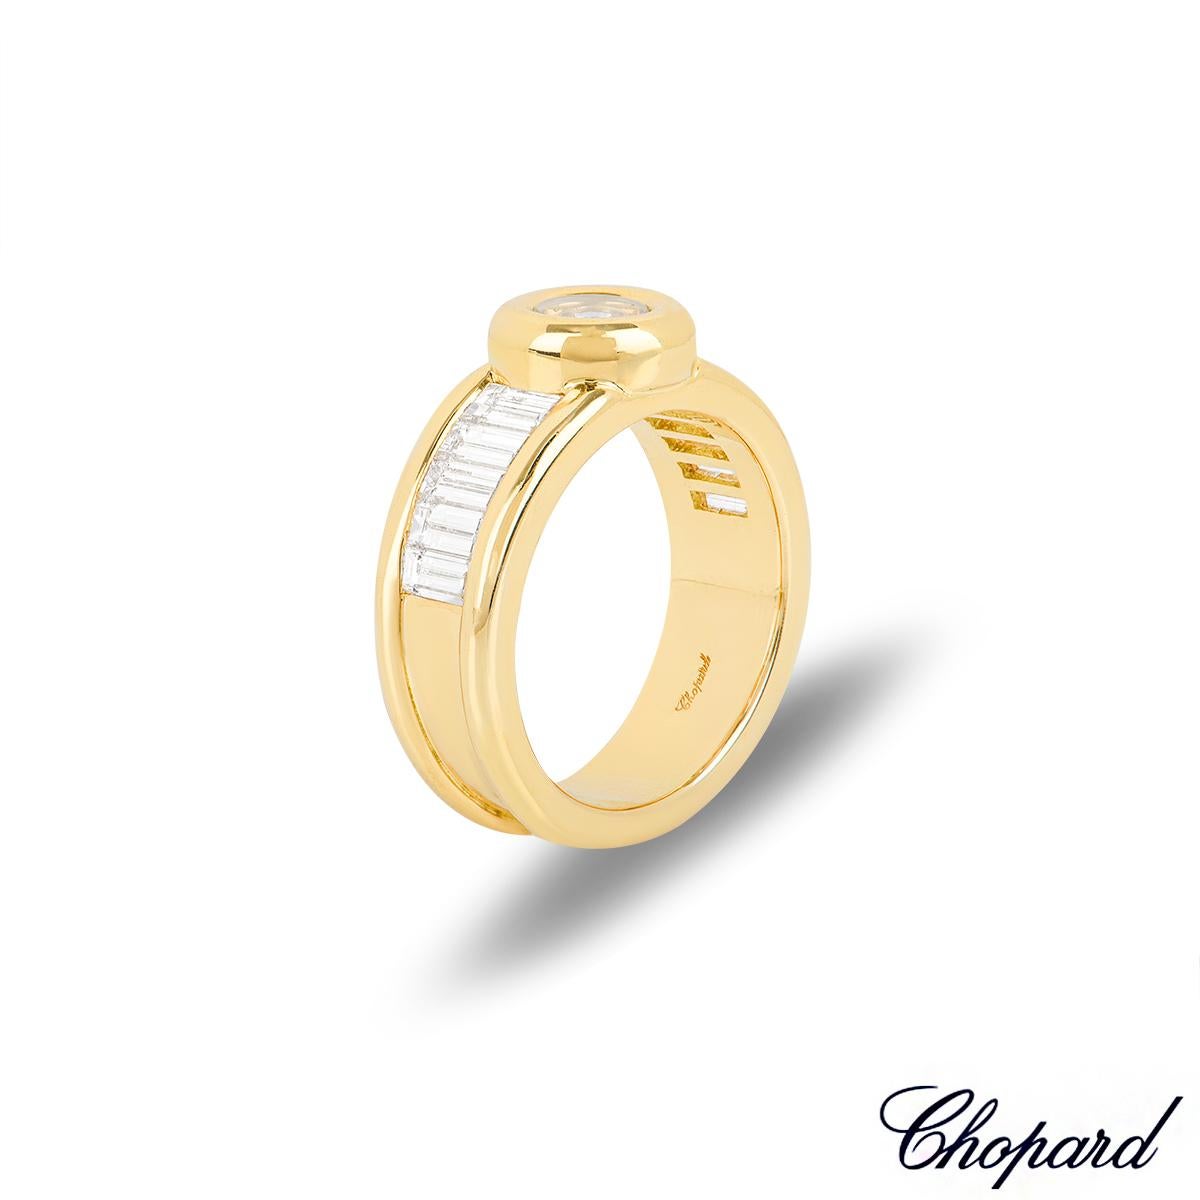 A dazzling 18k yellow gold ring from the Chopard Happy Diamonds collection. The ring is set to the centre with a circular motif, made up of the iconic Chopard signed glass, encasing a 0.10ct single bezel set floating diamond. Complementing the motif